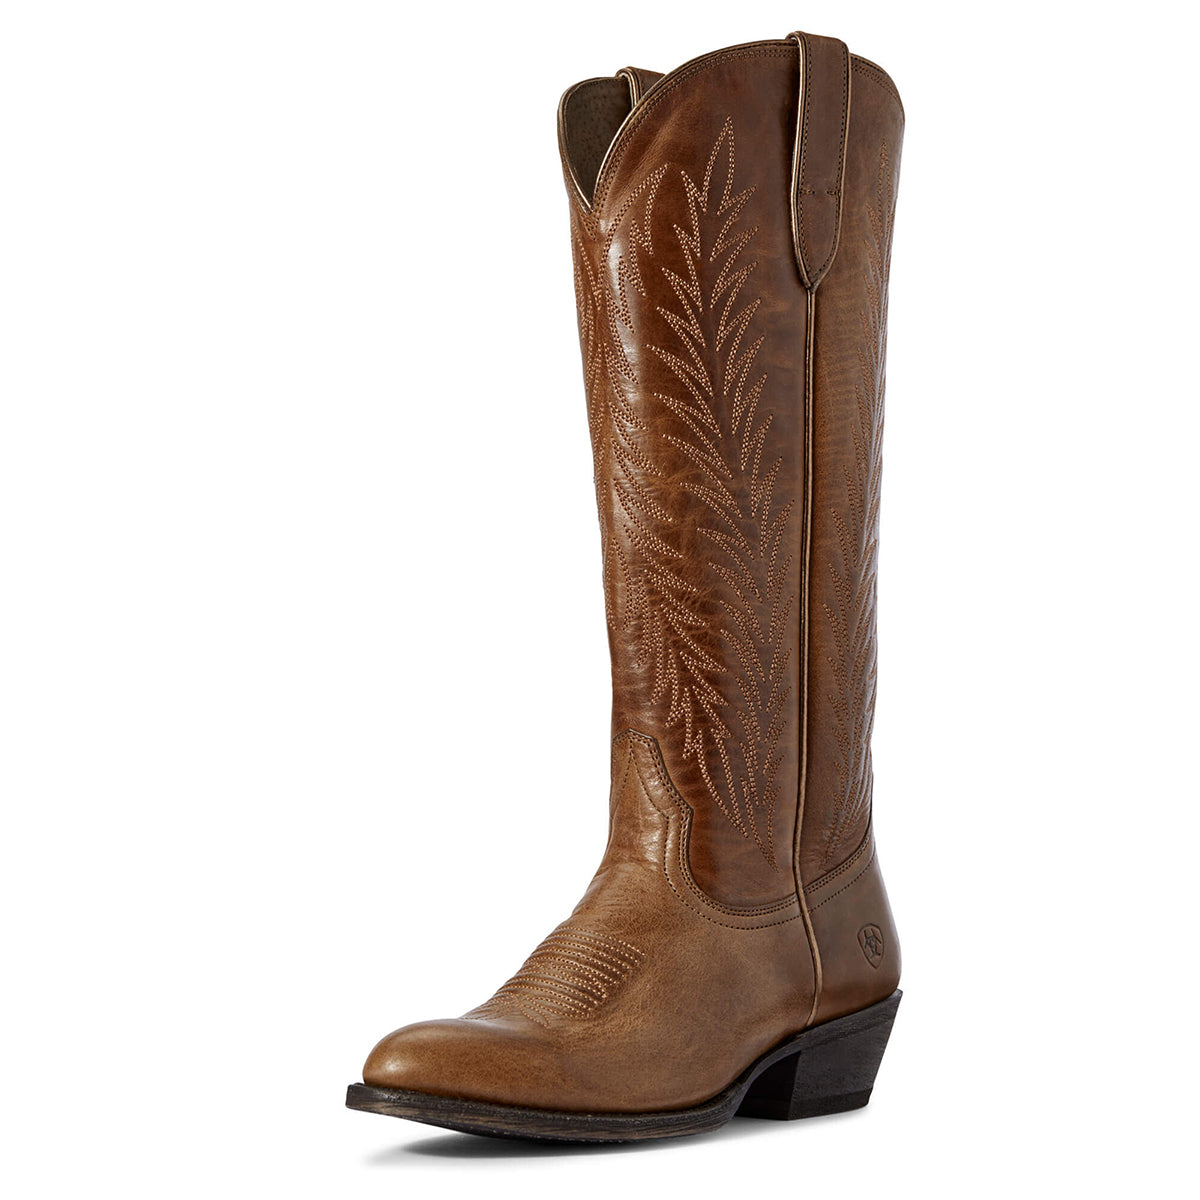 Women's Ariat Legacy Two Step Western Boot in Amber from the front